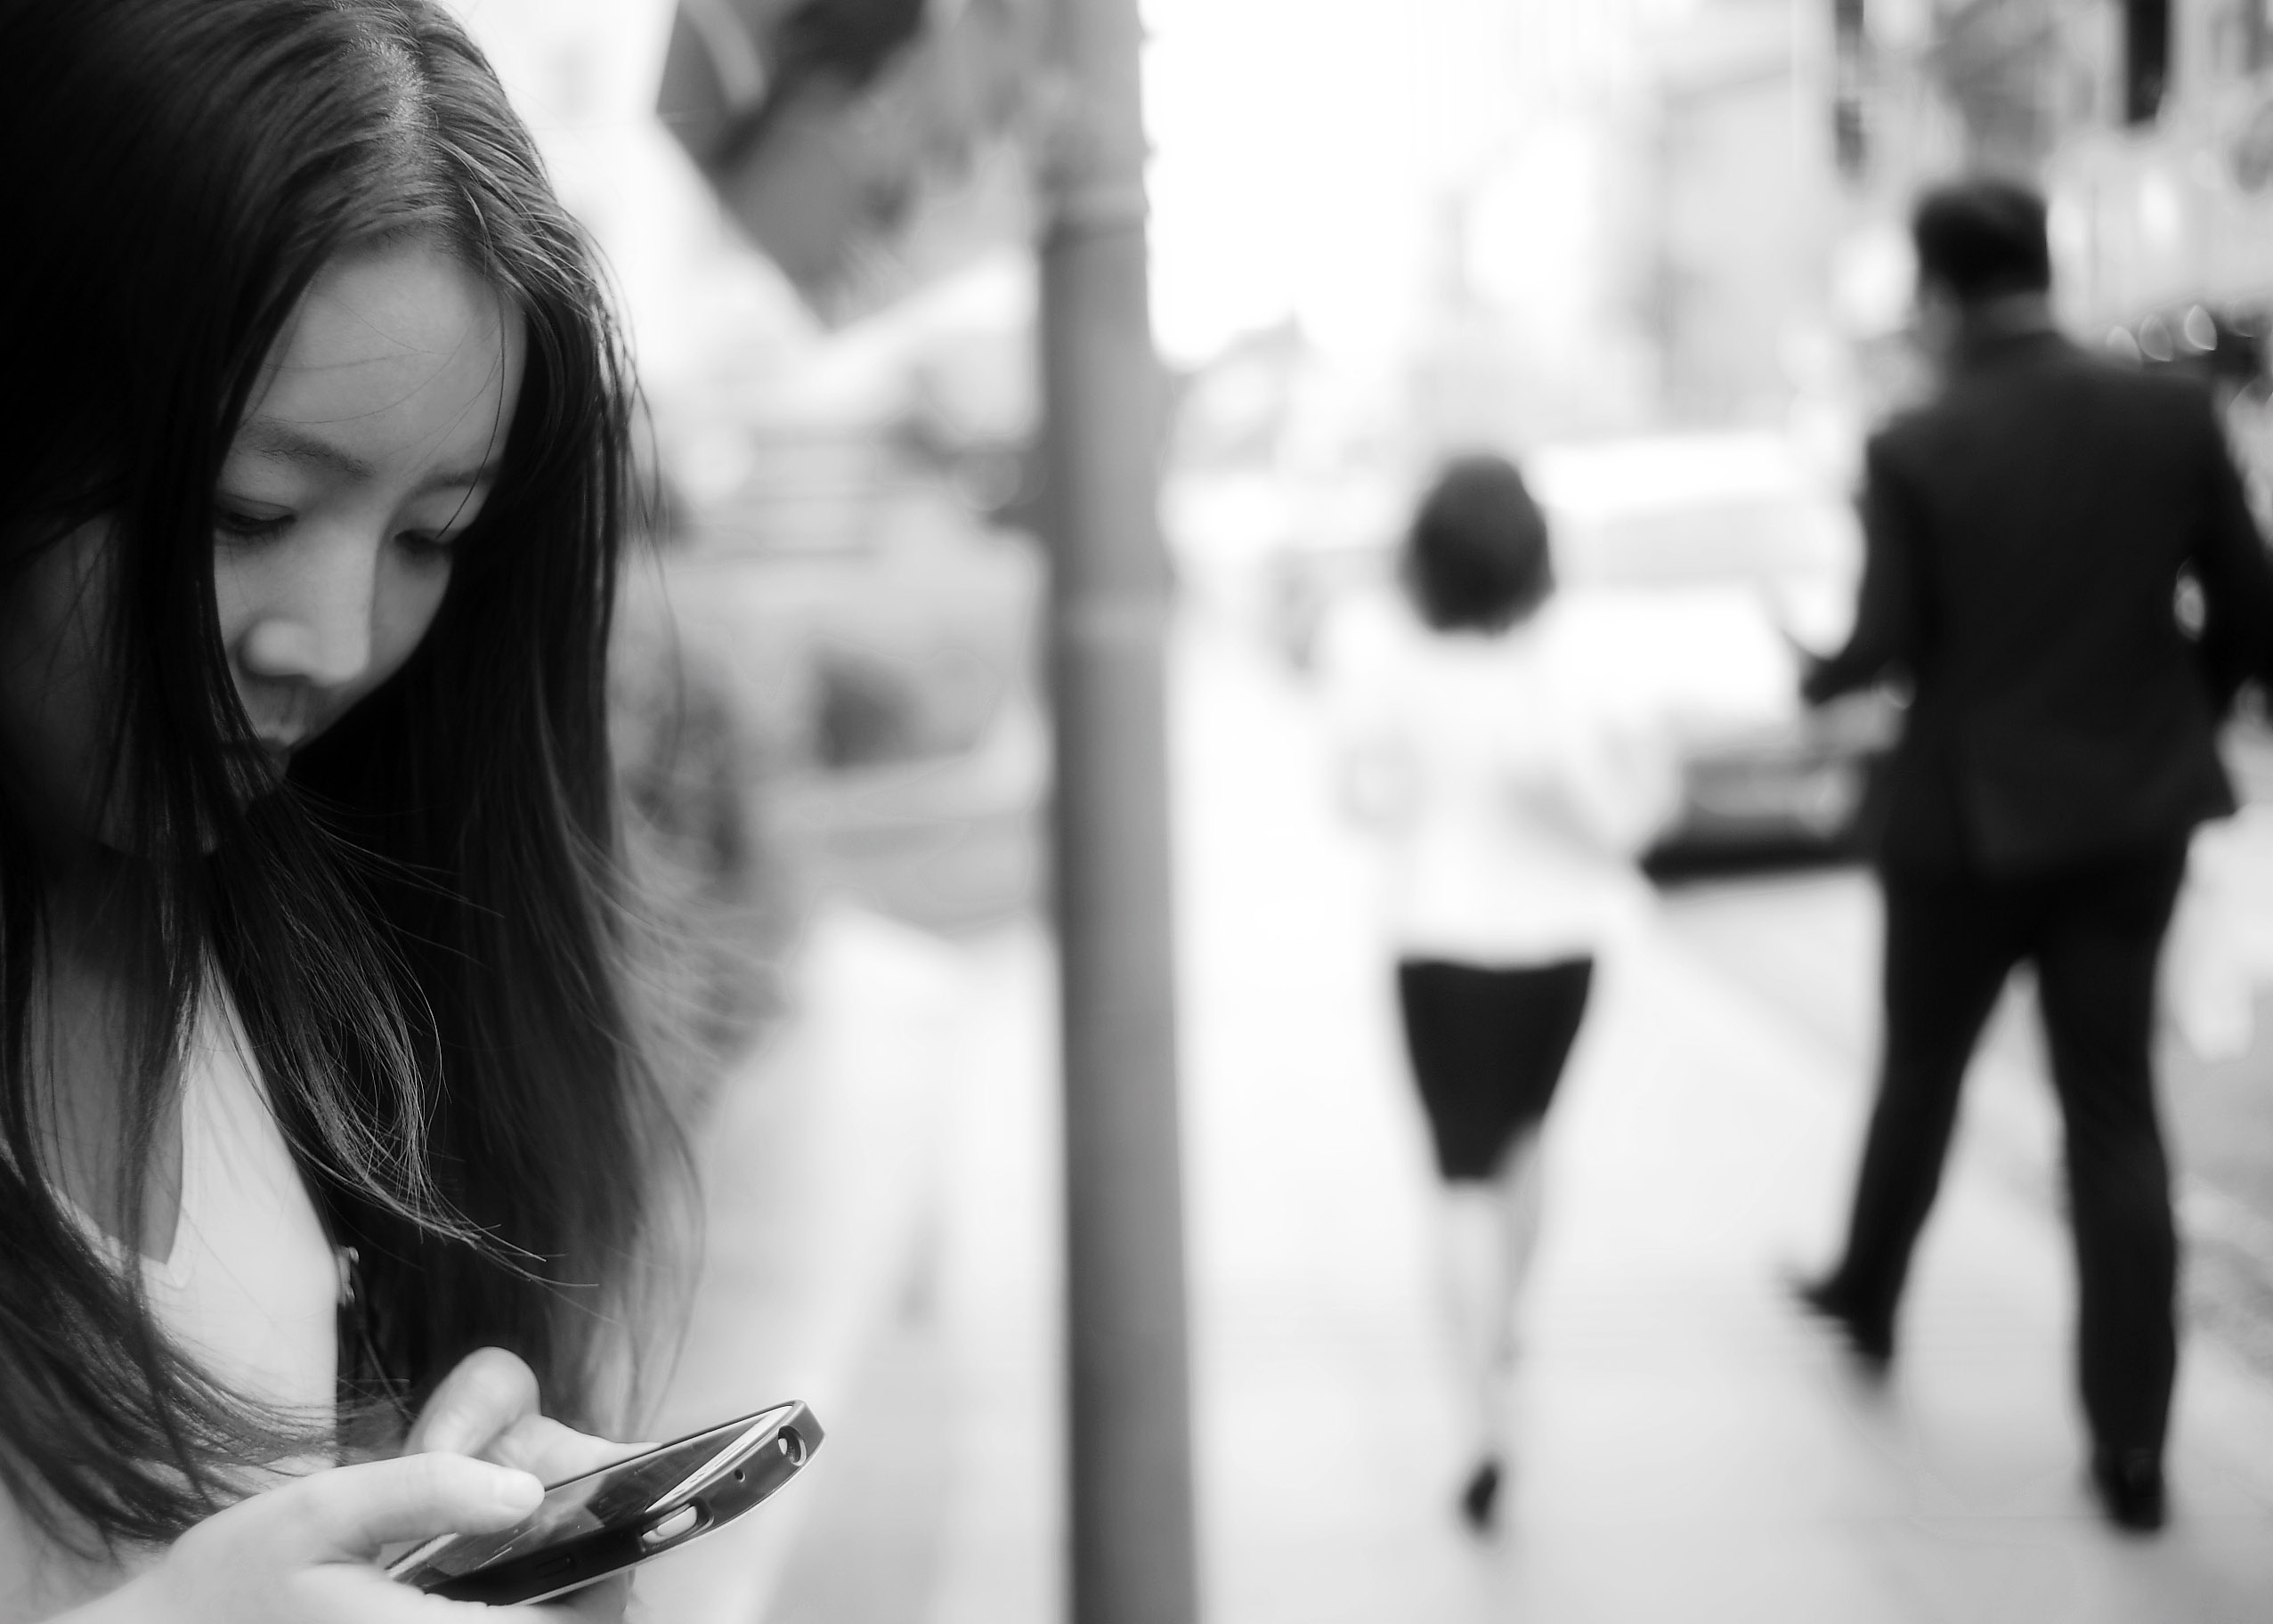 Free Stock Photo of Asian Women texting on the phone 